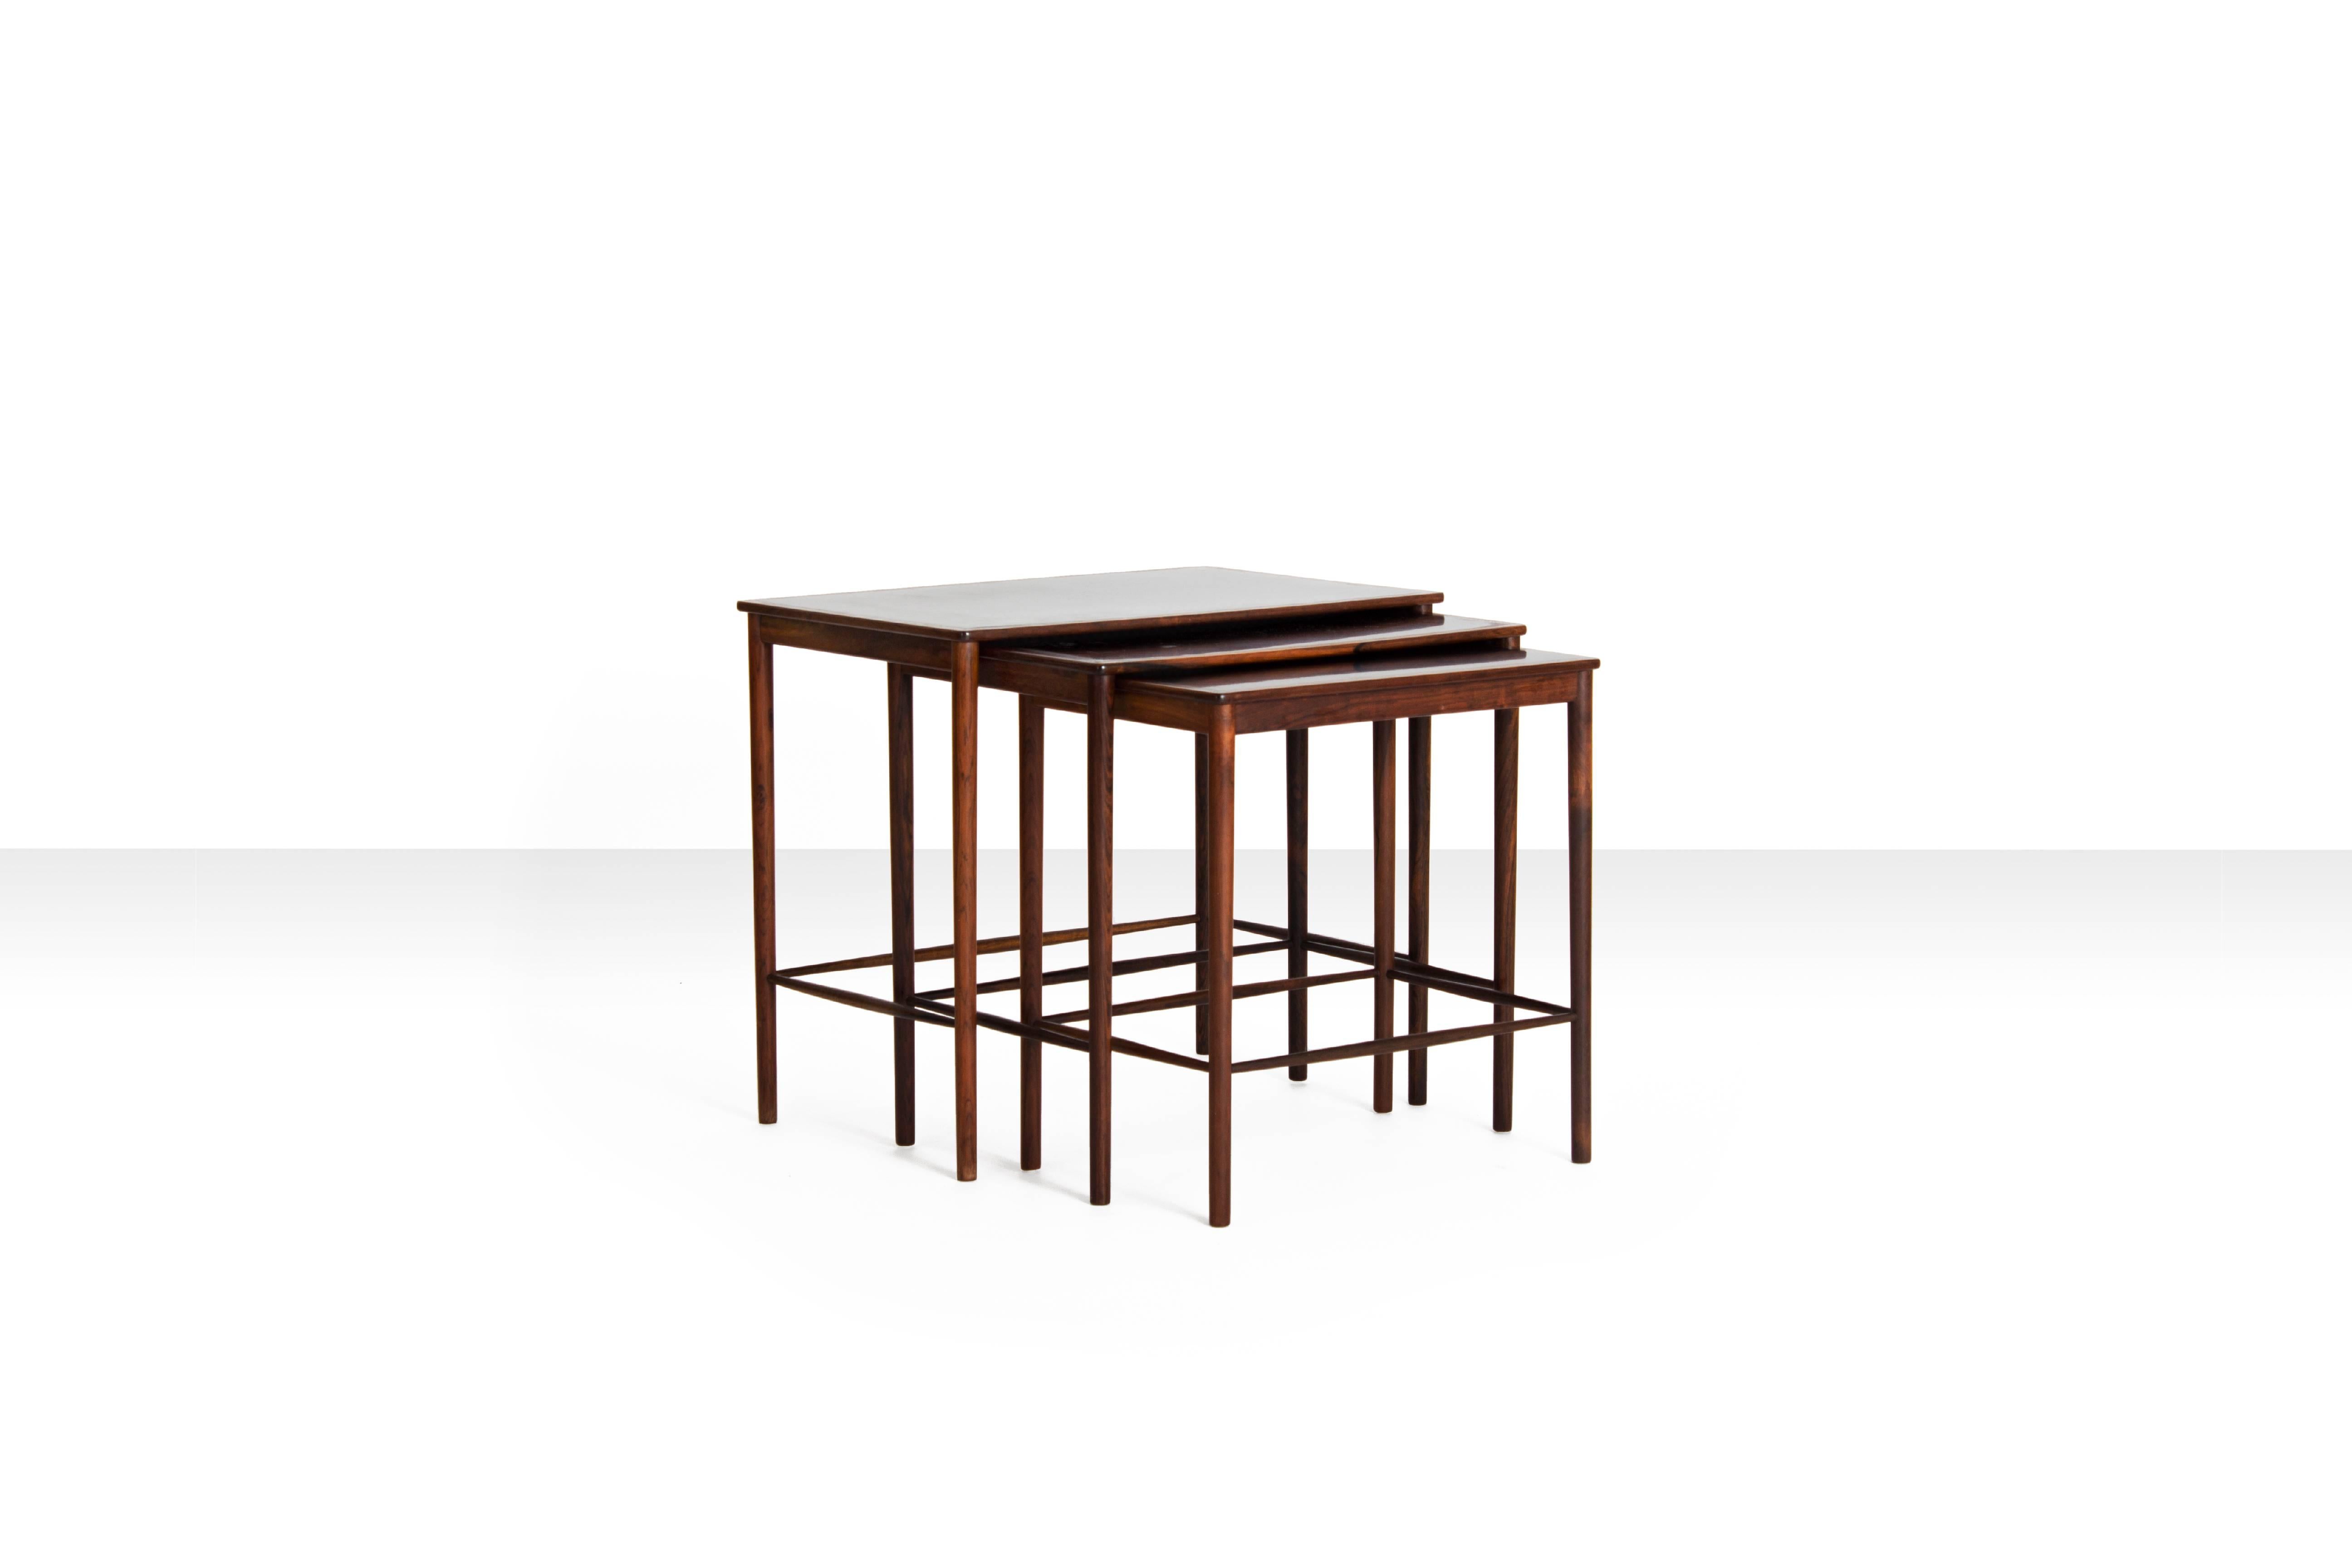 Rosewood and formica nesting tables by Kaj Winding for P. Jeppesens Møbelfabrik, Denmark 1960s

The craftsmanship on these pieces is truly marvellous. Standing next to the 'curva' chairs by Brazilian designer Joaquim Tenreiro a lot of visitors of